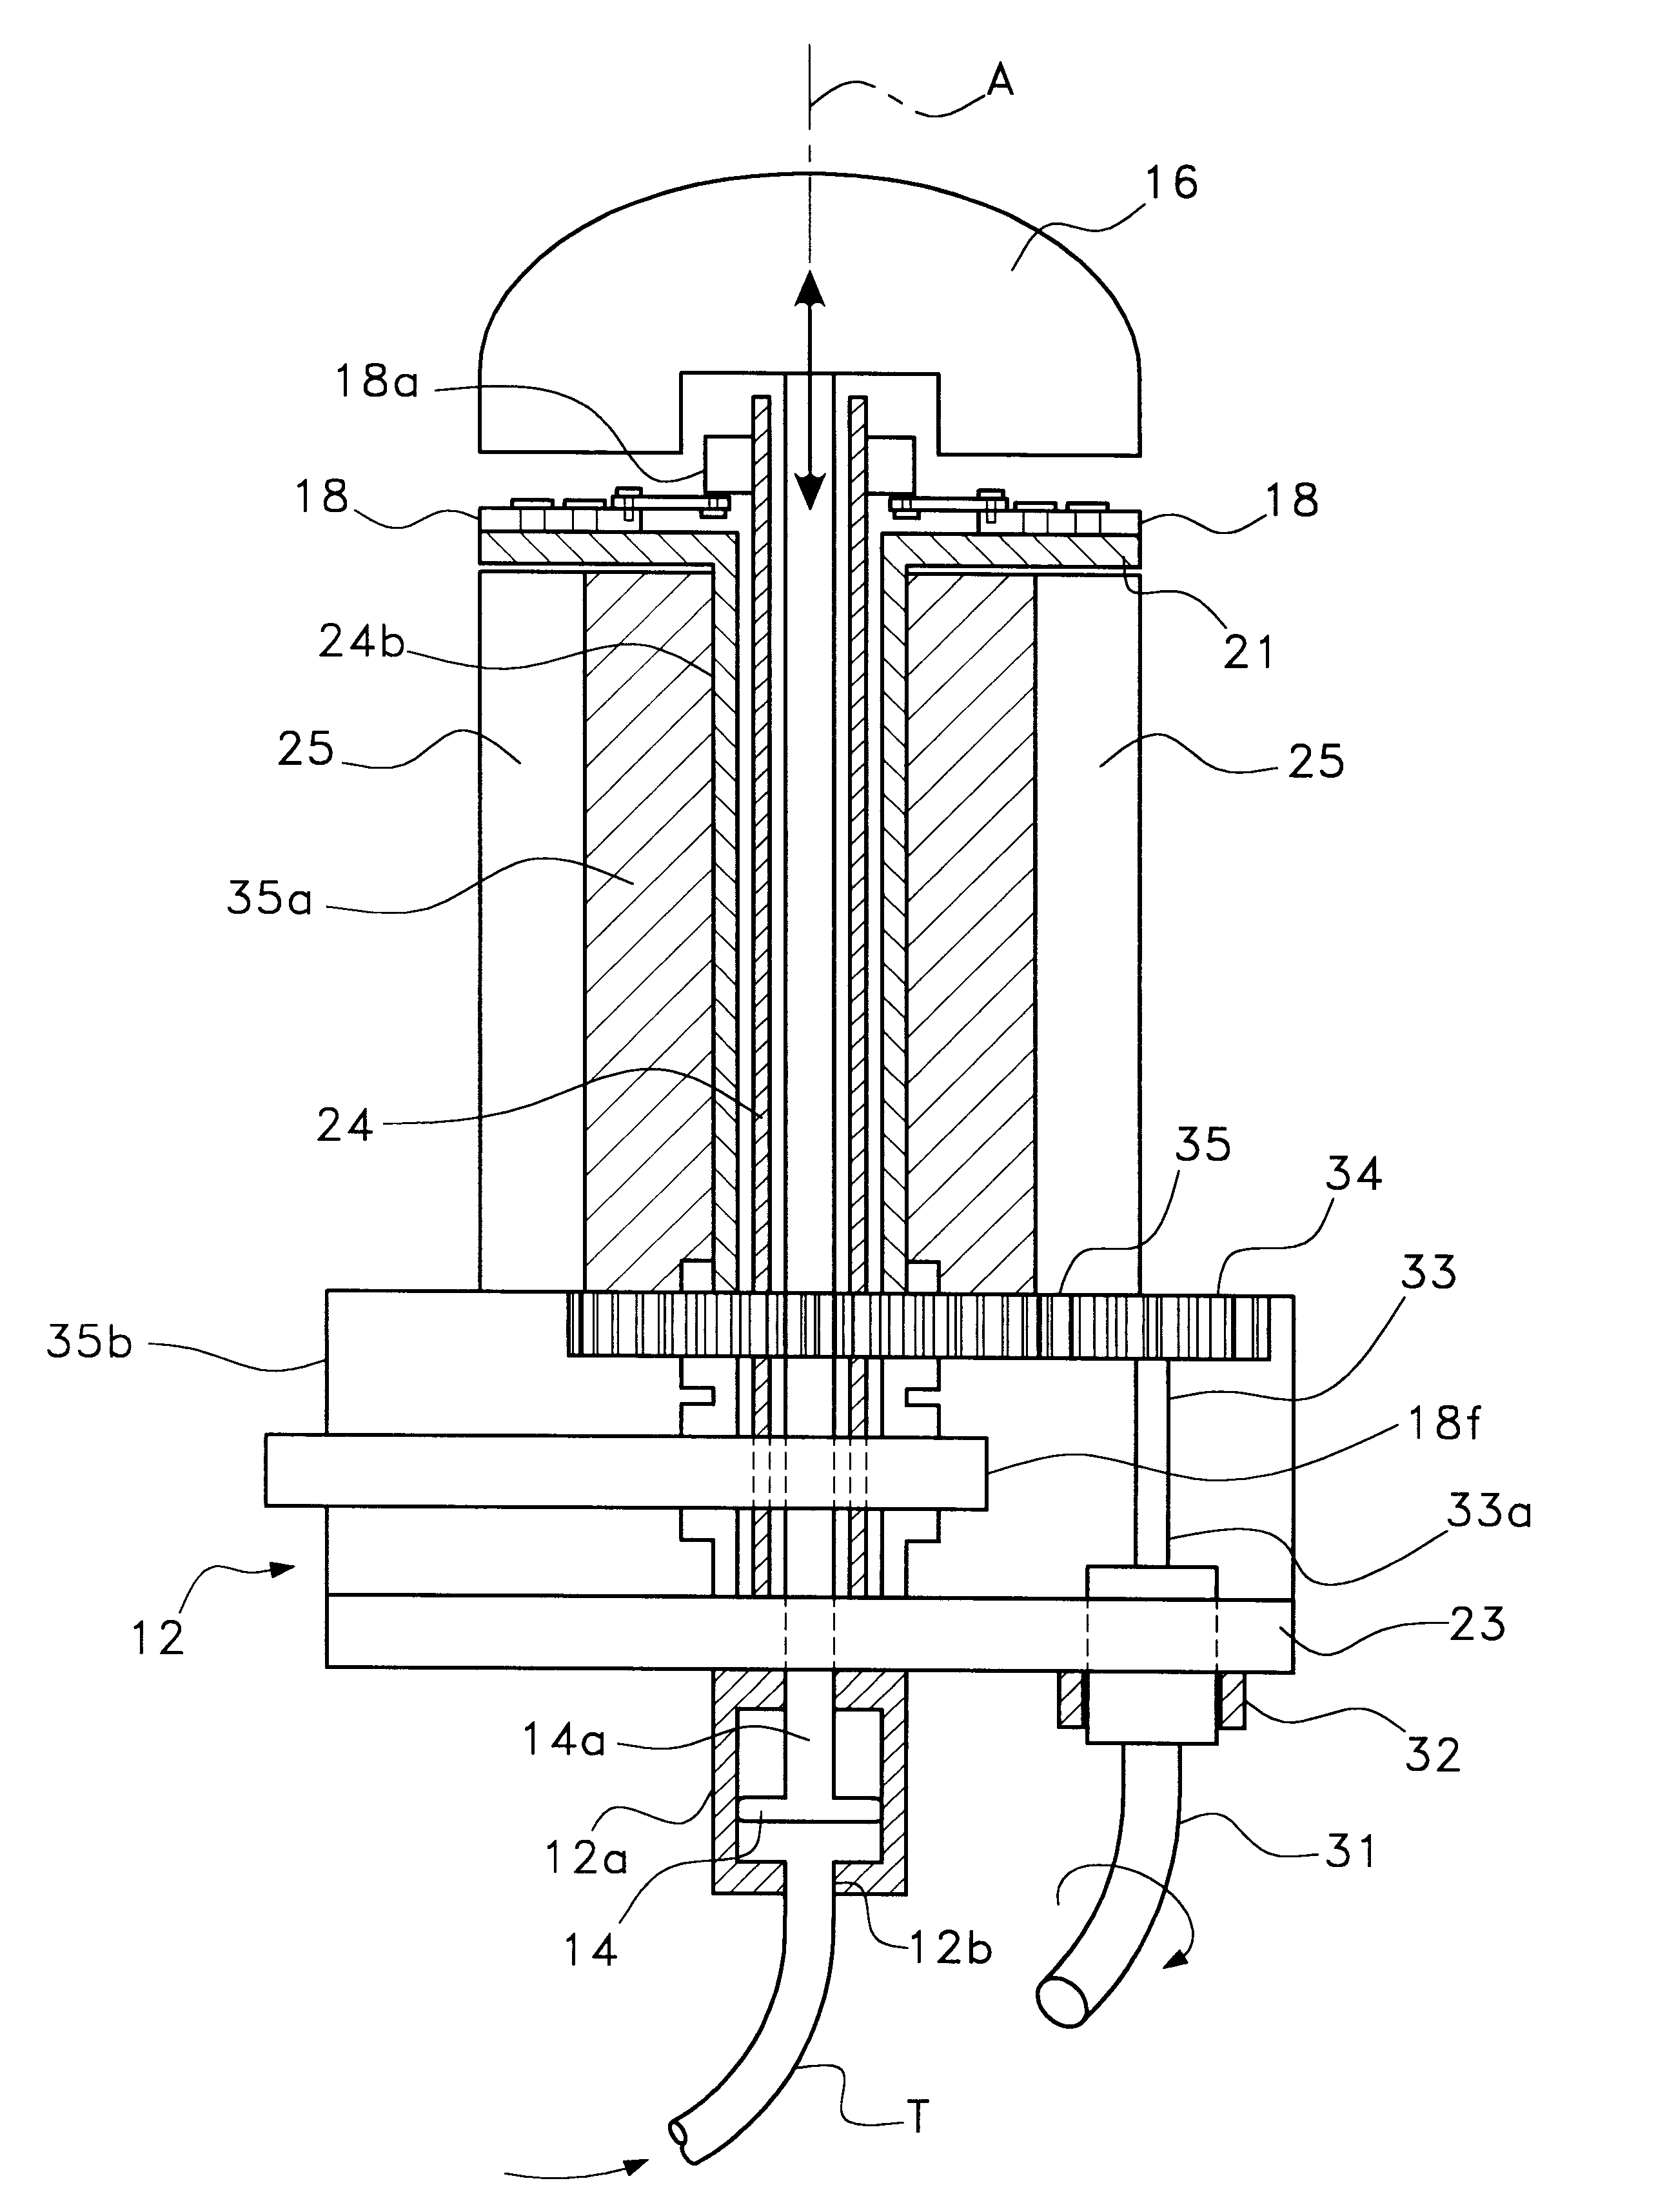 Method and apparatus for shaping a site for anchoring an implant and to provide bone augementation and shape conformity